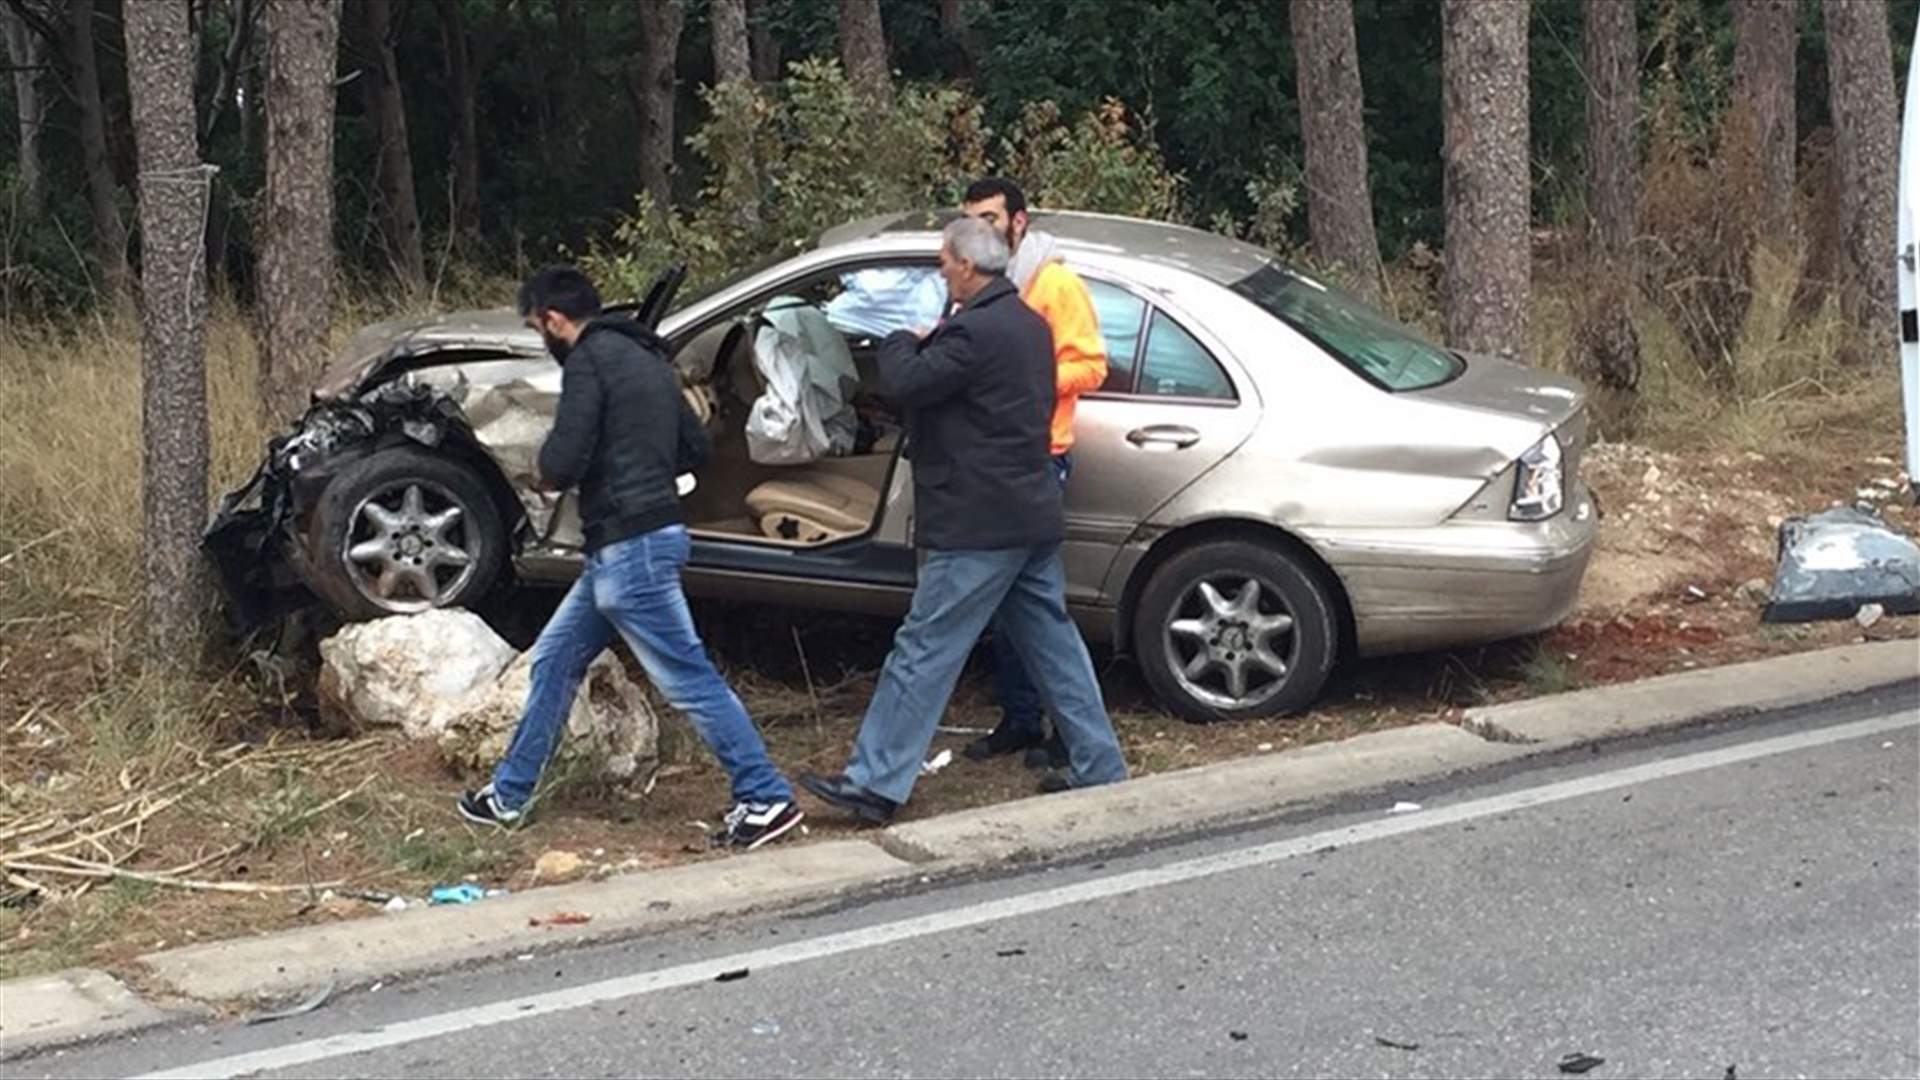 [PHOTOS] Car accident leaves 2 people injured in Jeita 